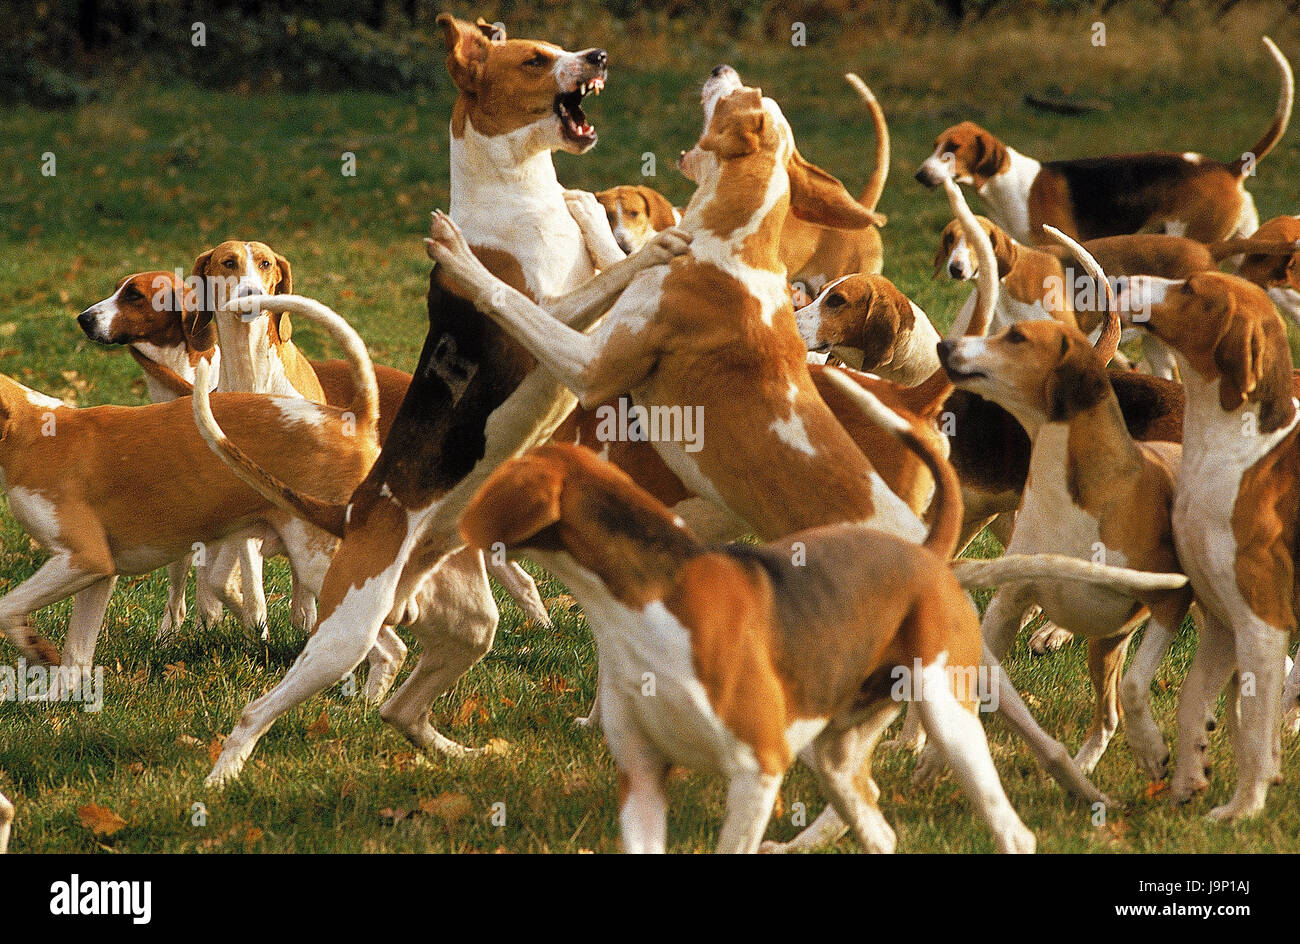 Dogs,Grand Anglo francais tricolore,Grand Anglo francais blanc et orange,fight, Stock Photo